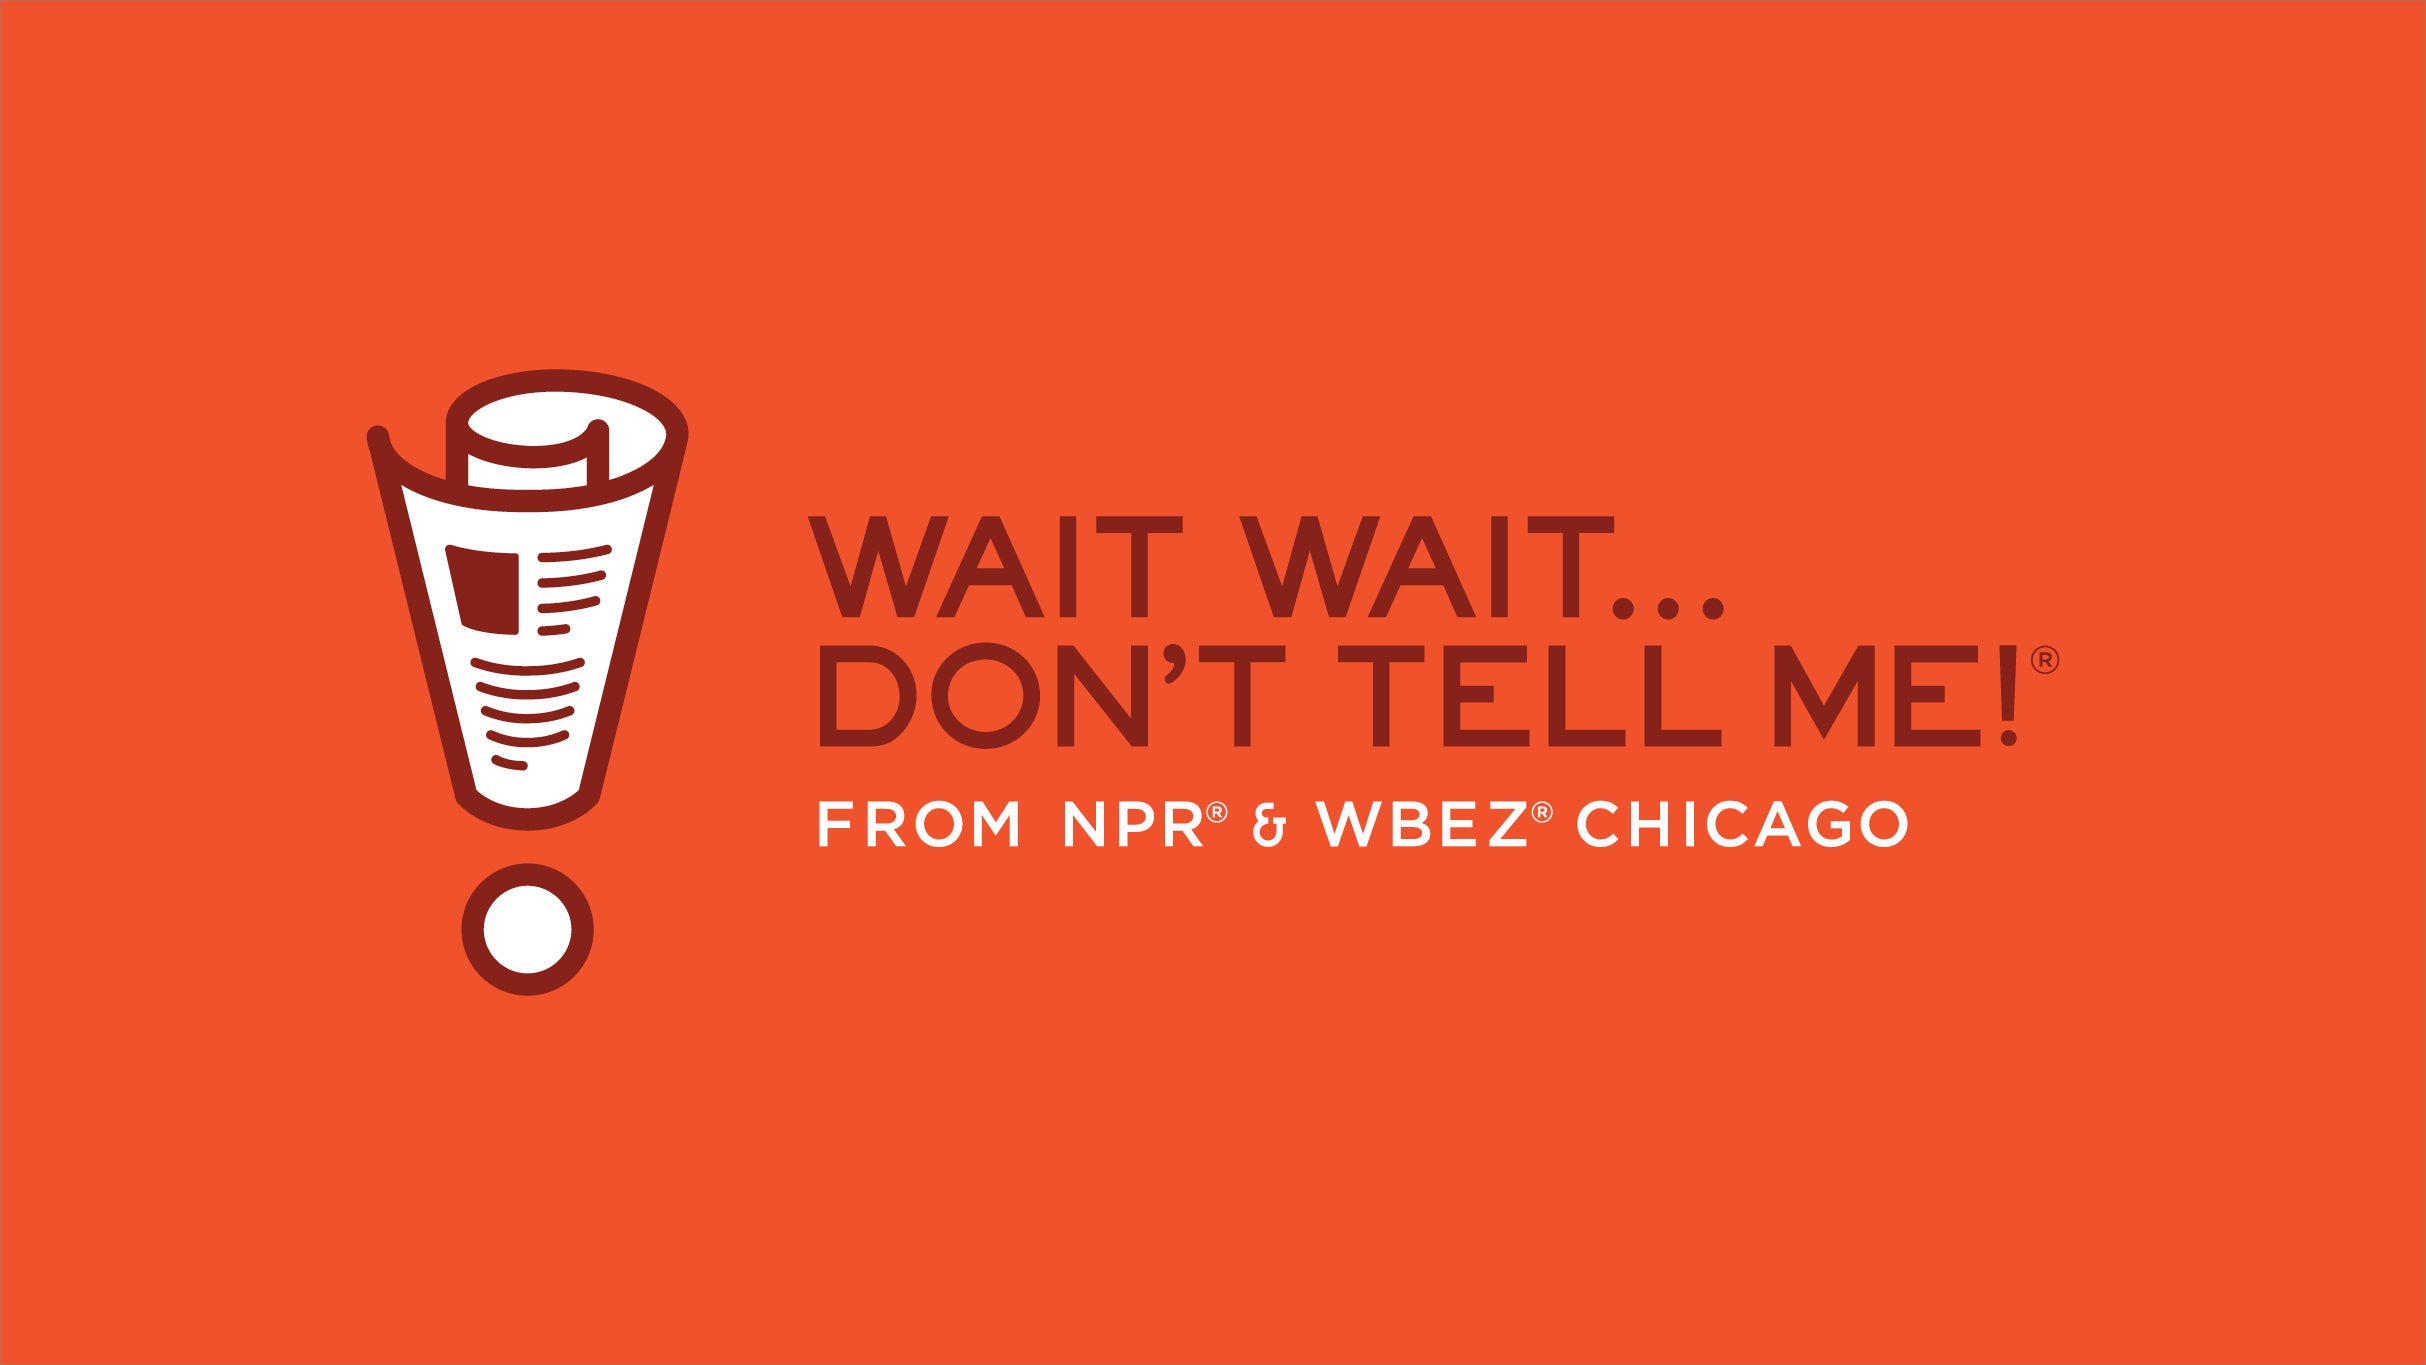 NPR Presents WAIT, WAIT...DON'T TELL ME! in association with WHYY presales in Philadelphia